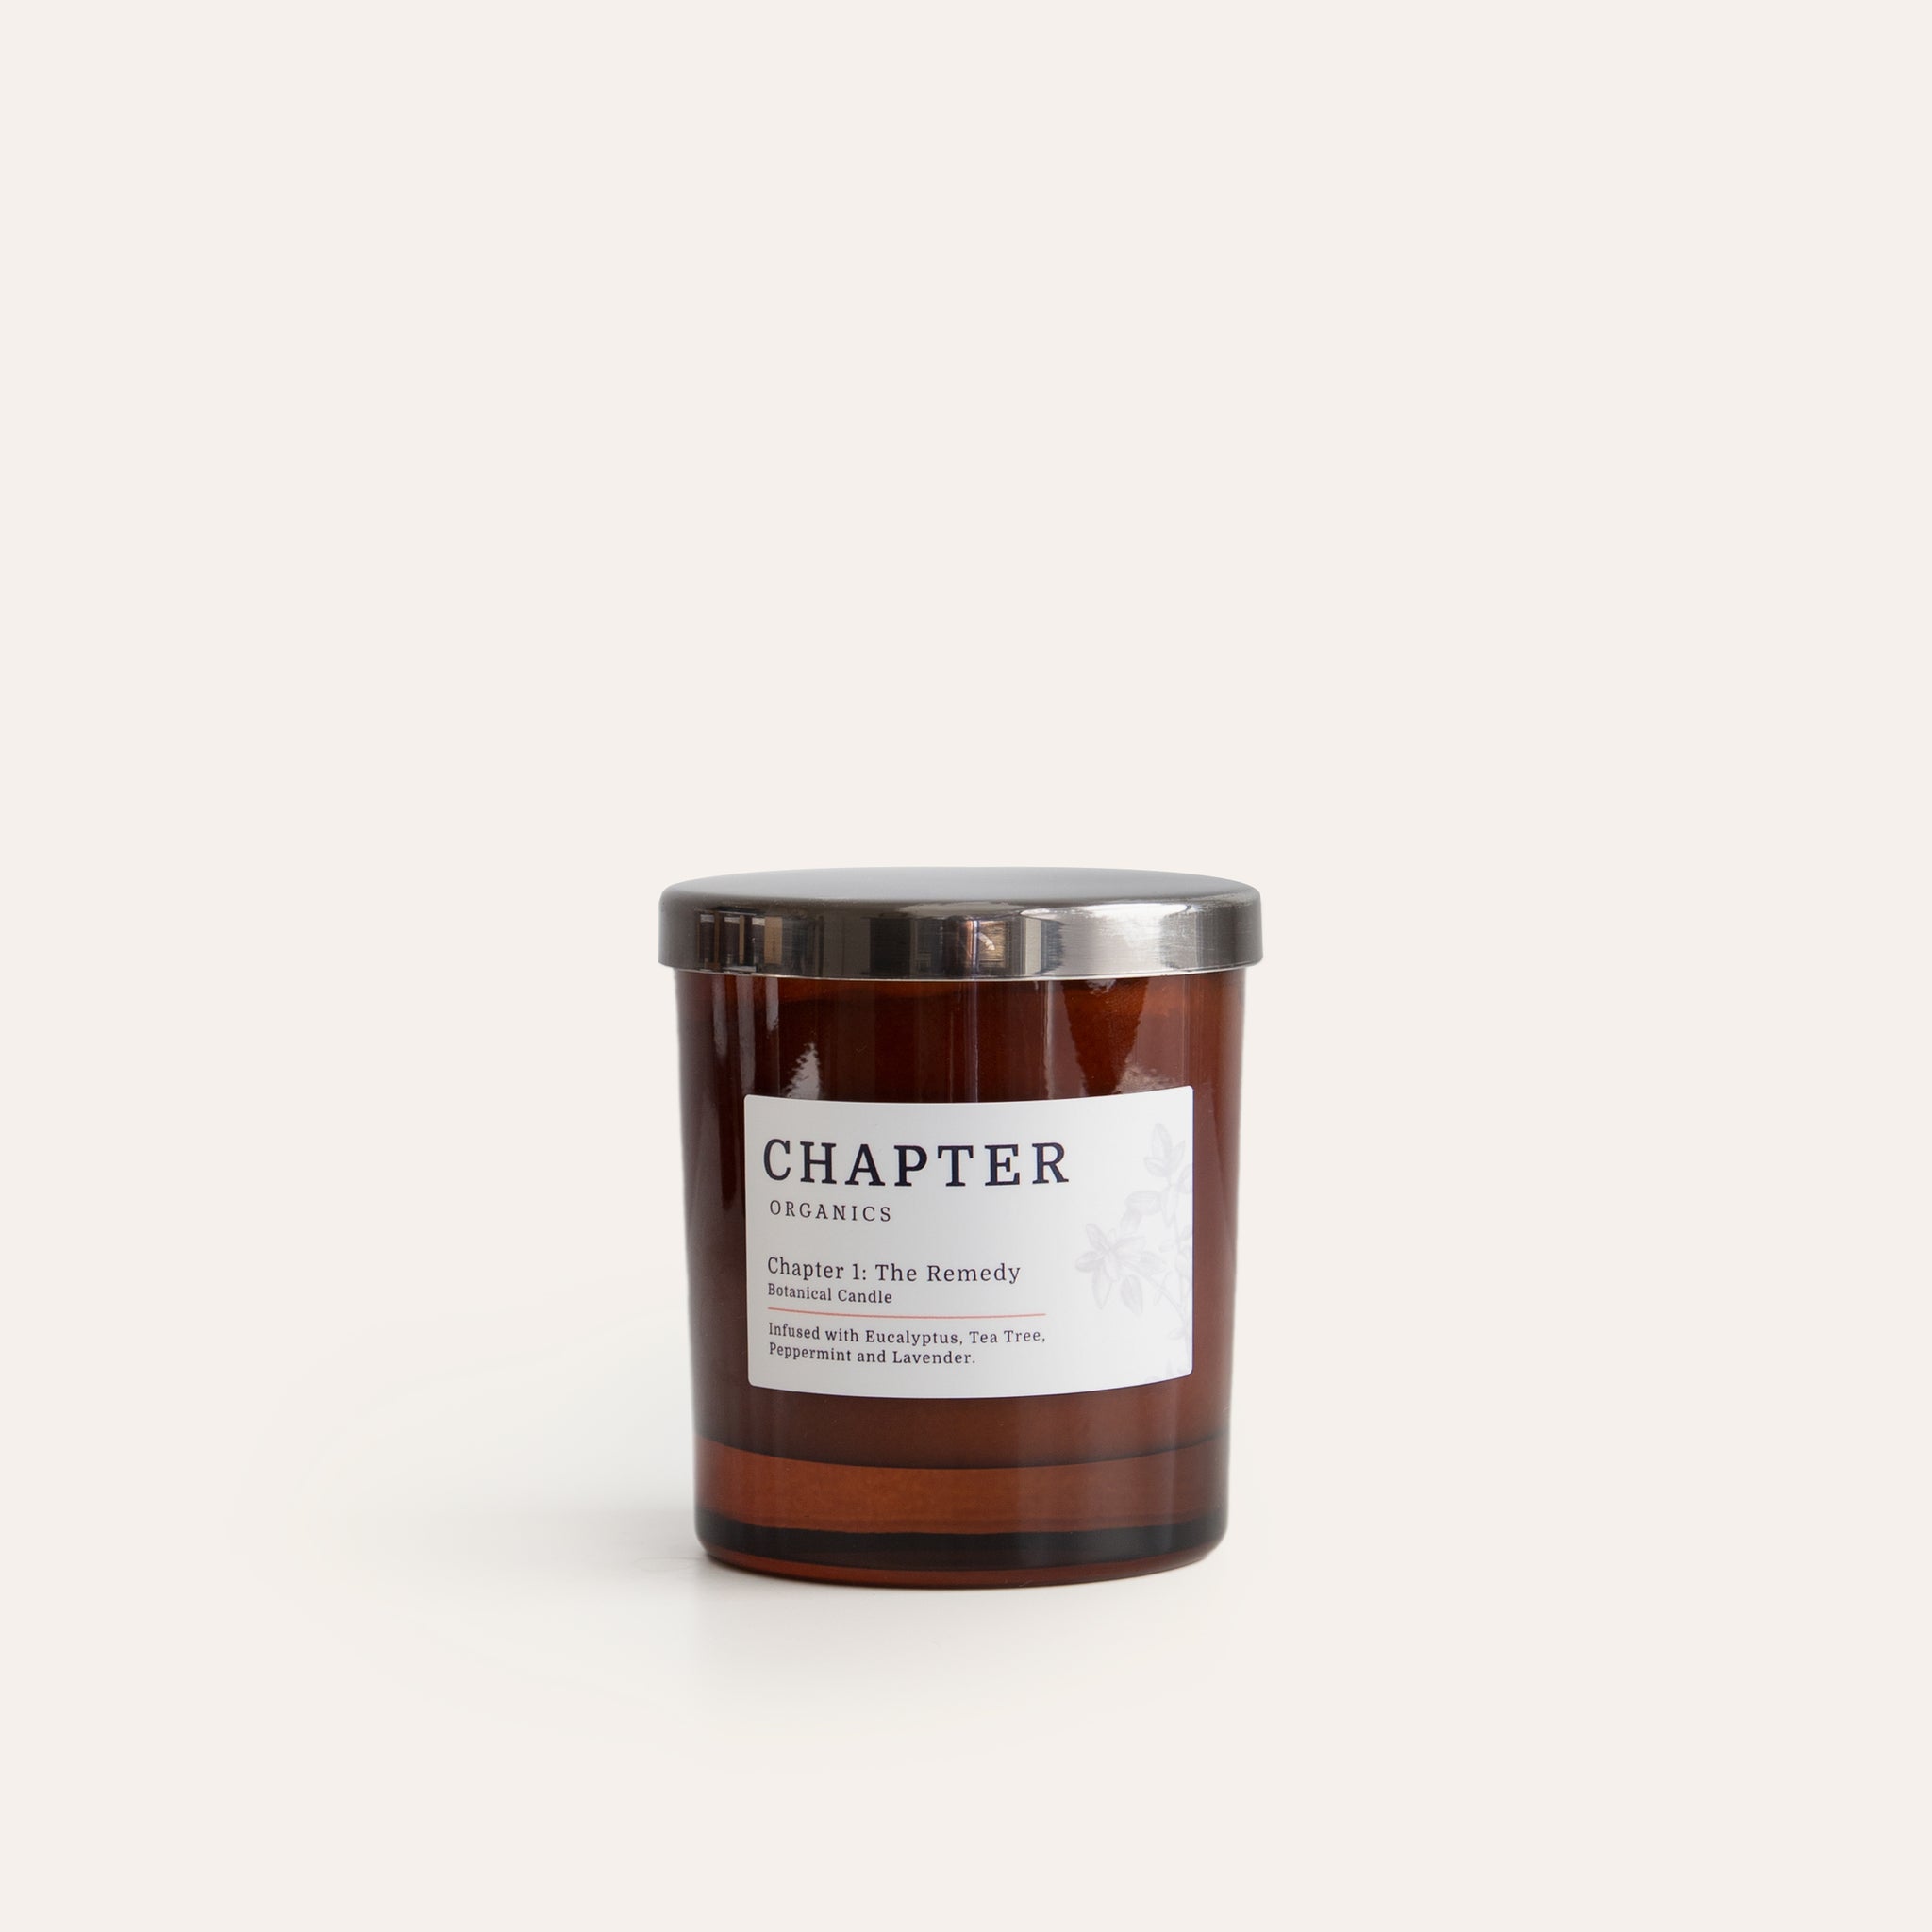 The Clarity Luxury Natural Aromatherapy Candle